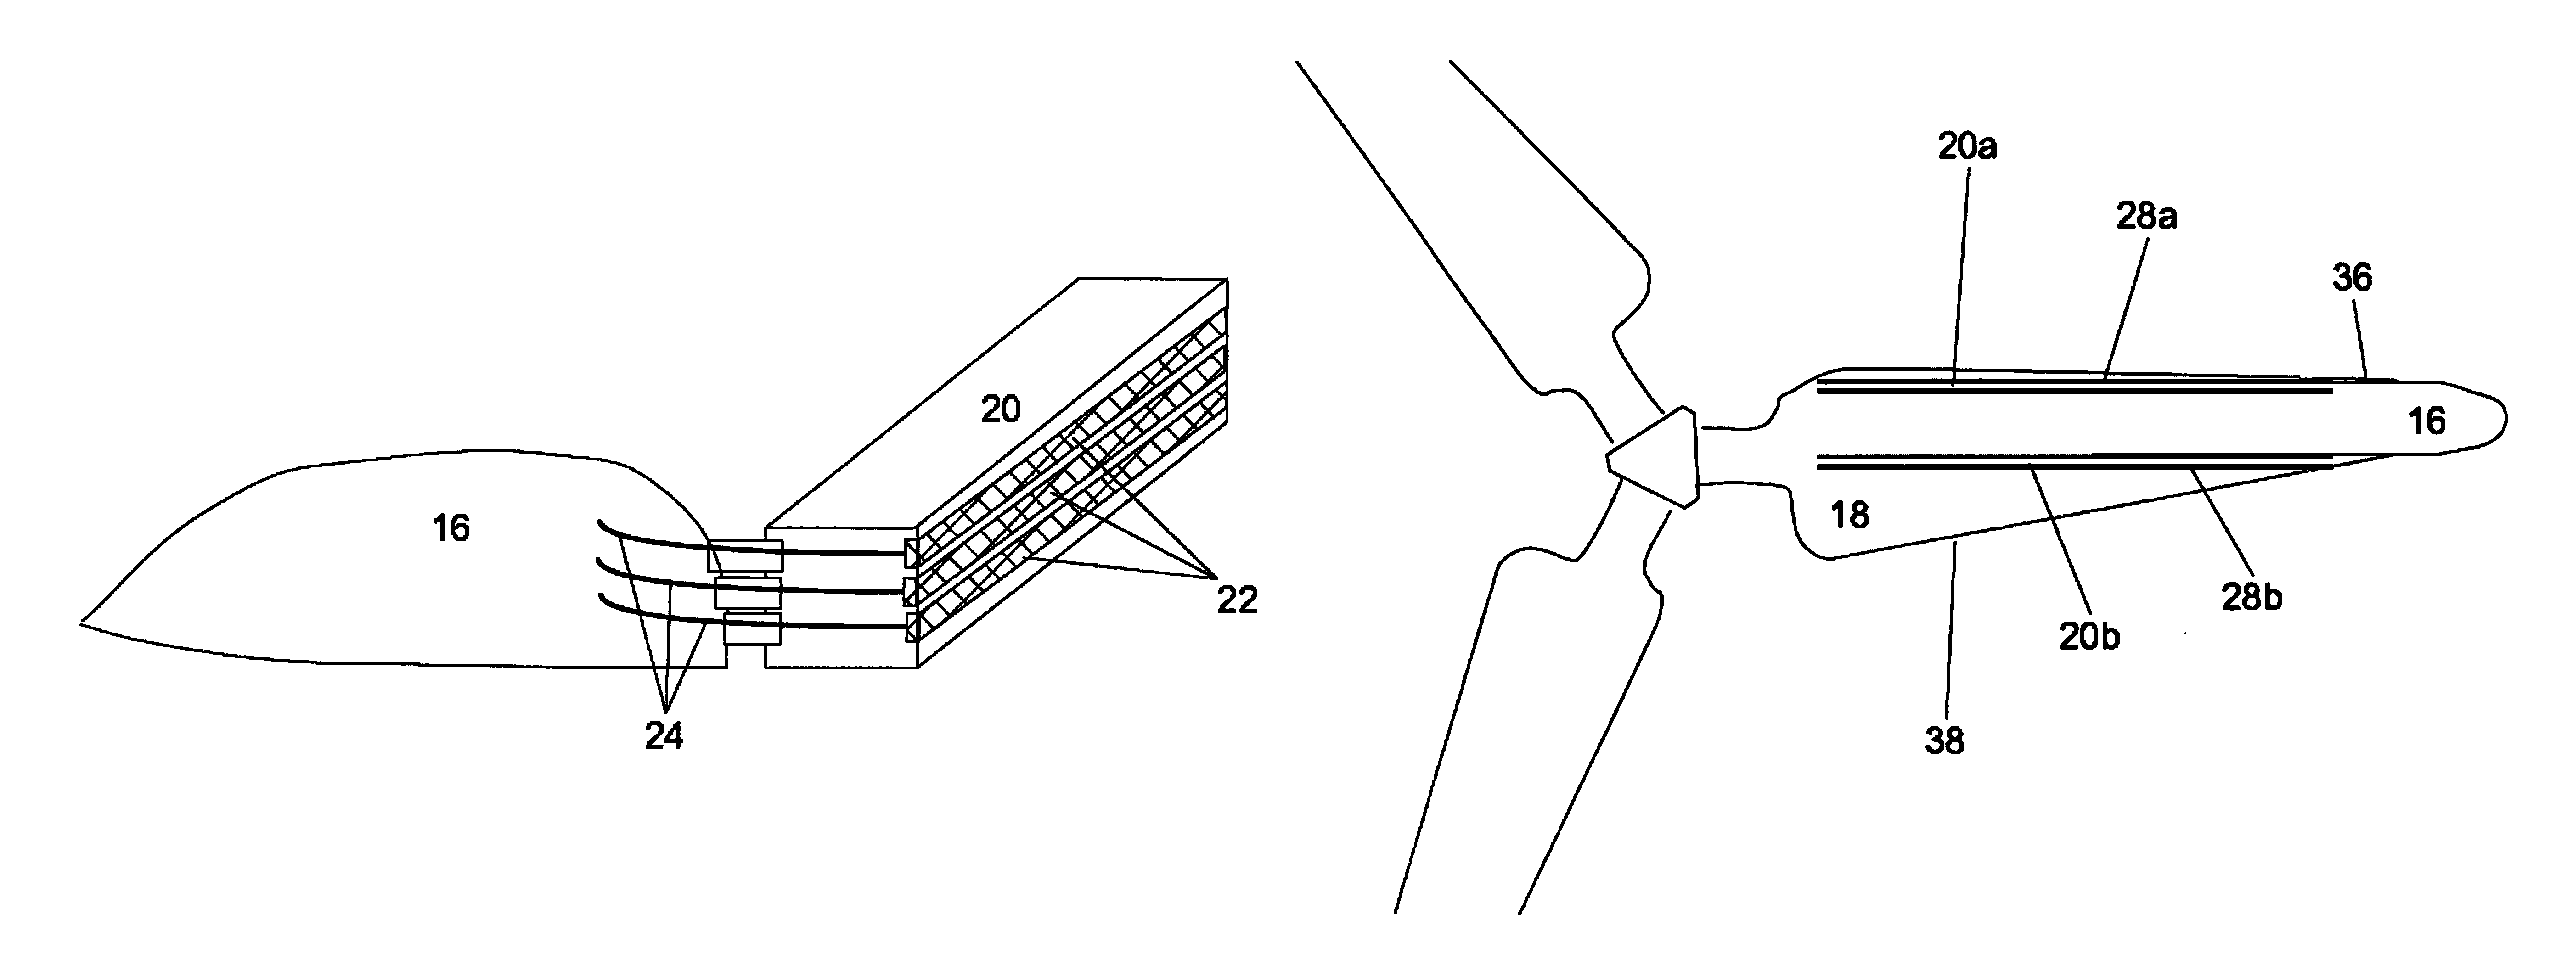 Methods and system for providing power and signals in a turbine